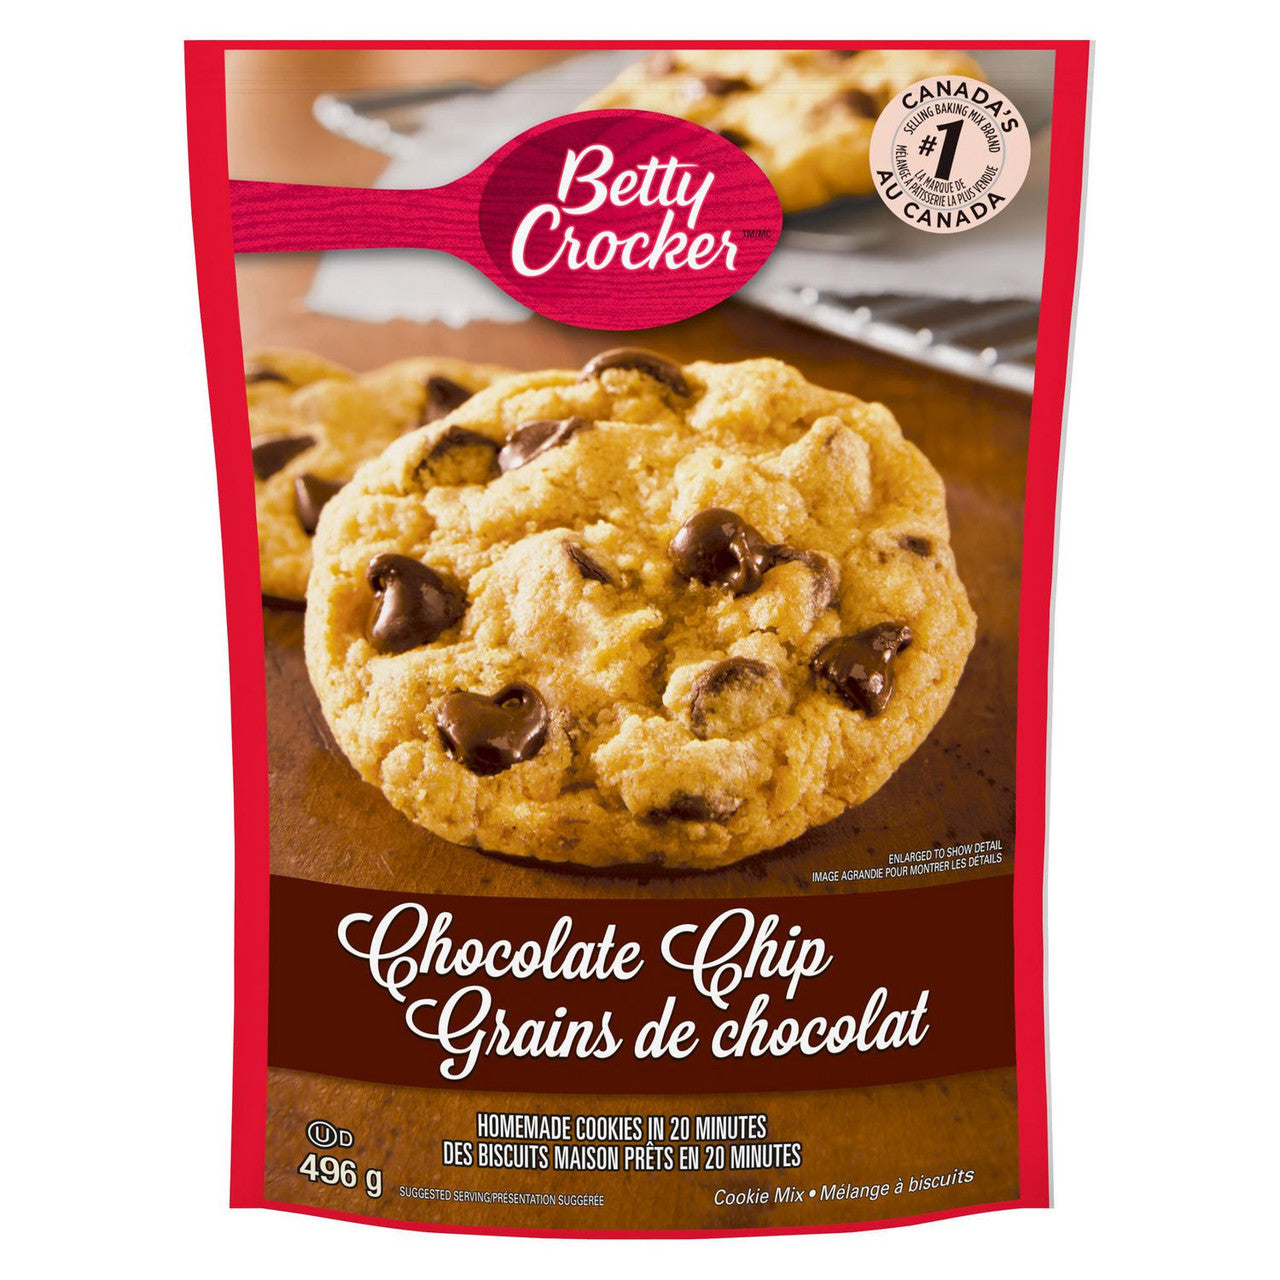 Betty Crocker Chocolate Chip Cookie Mix, 496g/17 oz. Box {Imported from Canada}